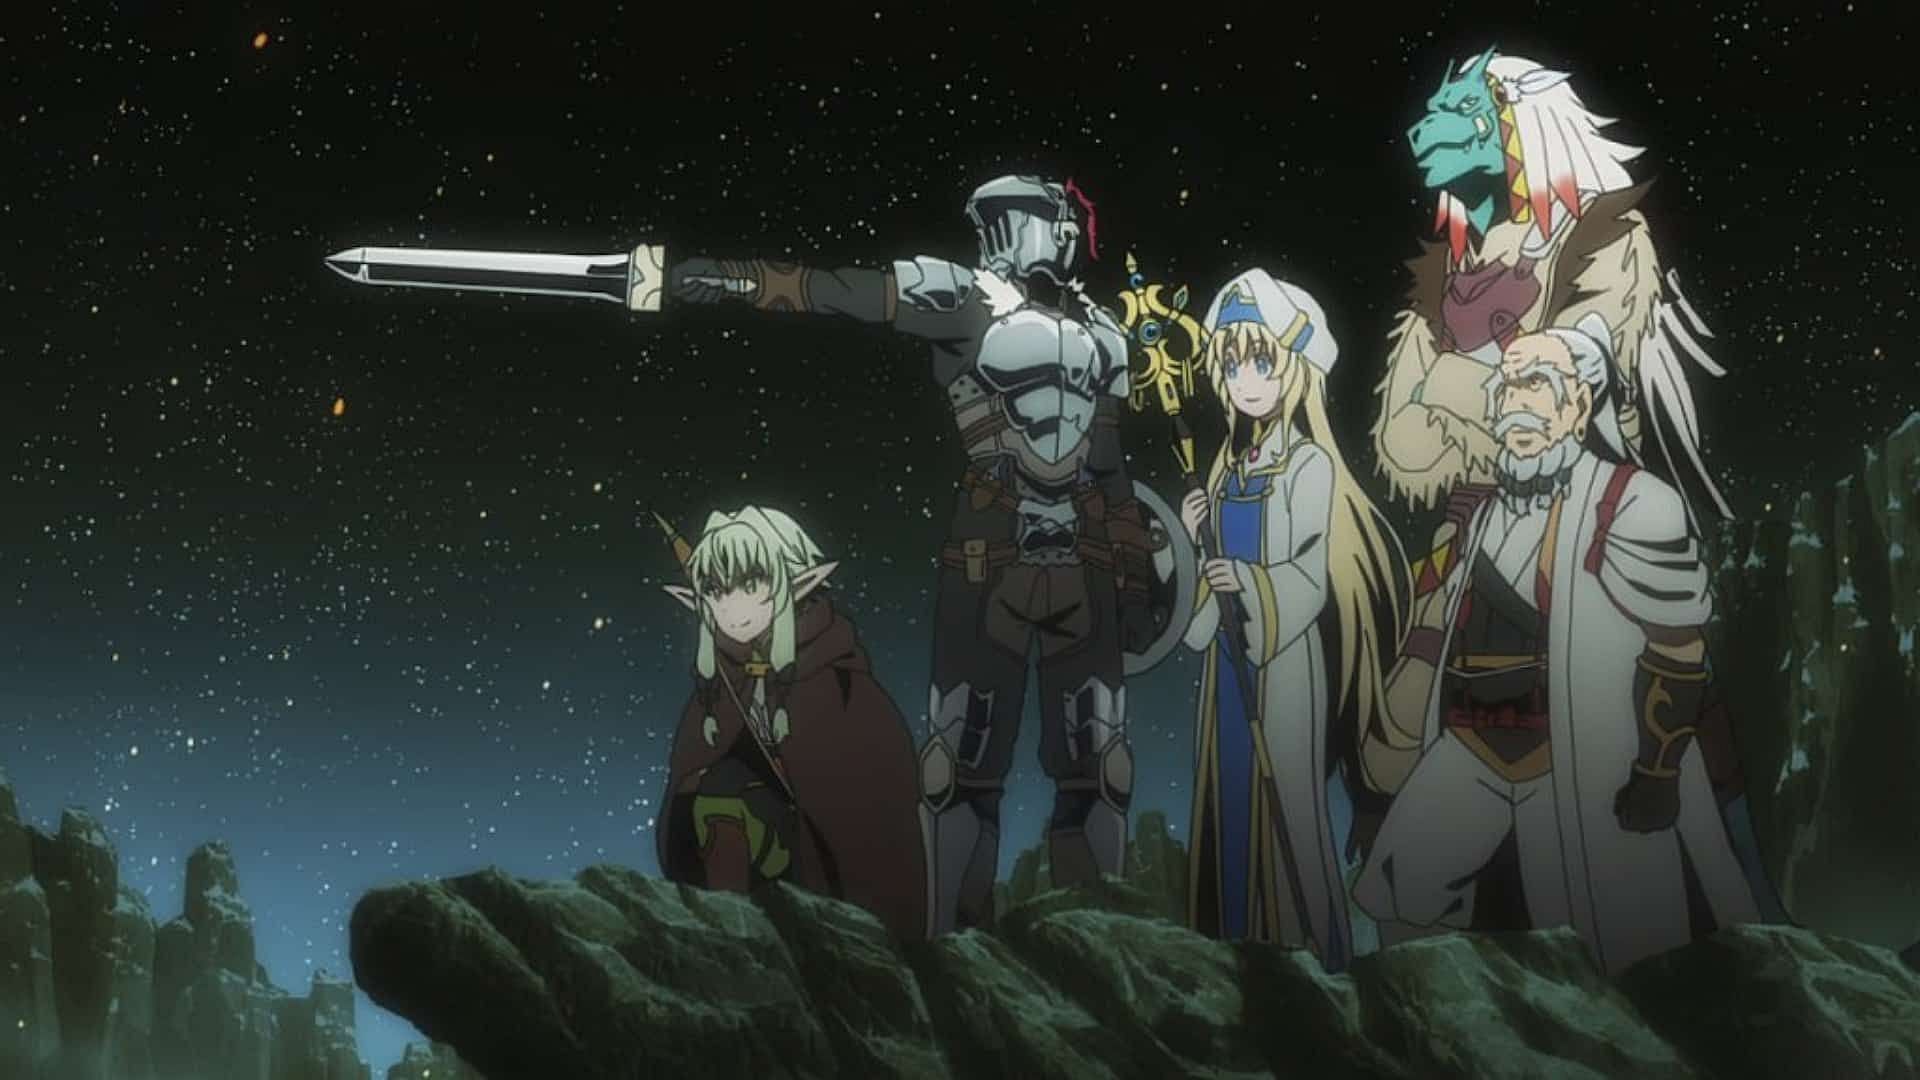 Goblin Slayer Season 2: Expected release date, where to watch, and more